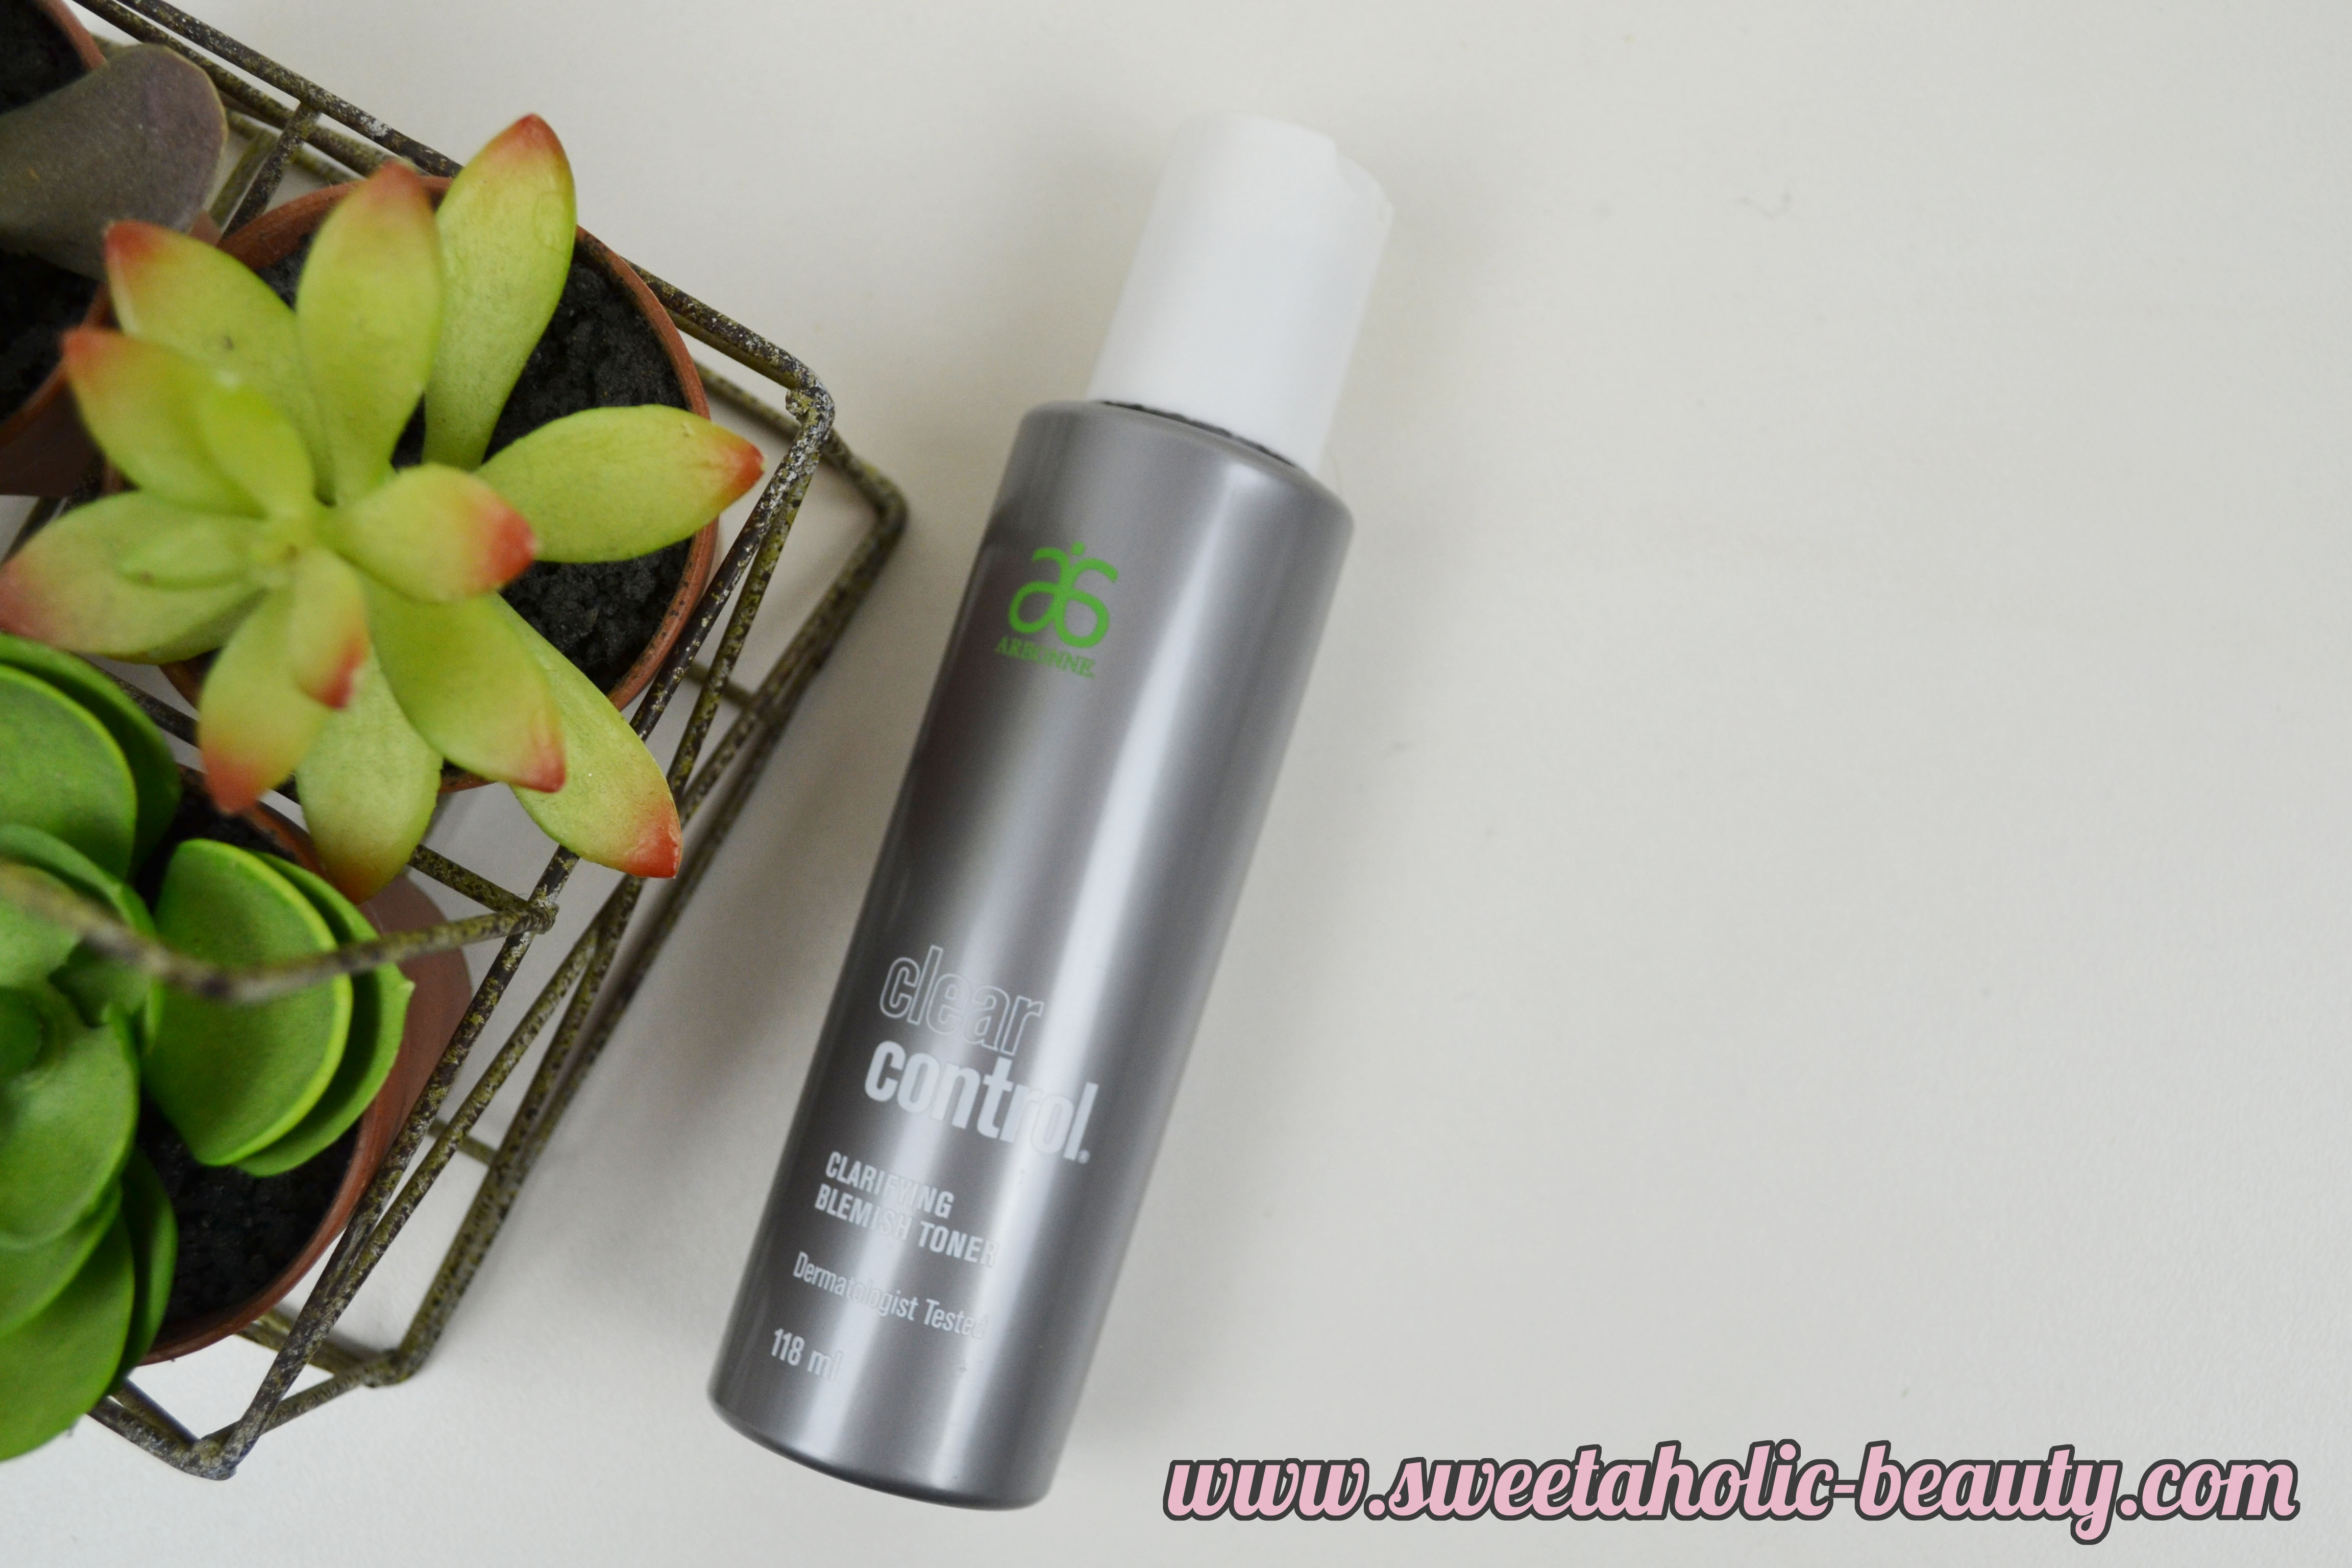 Arbonne Clear Control Range Review - Sweetaholic Beauty